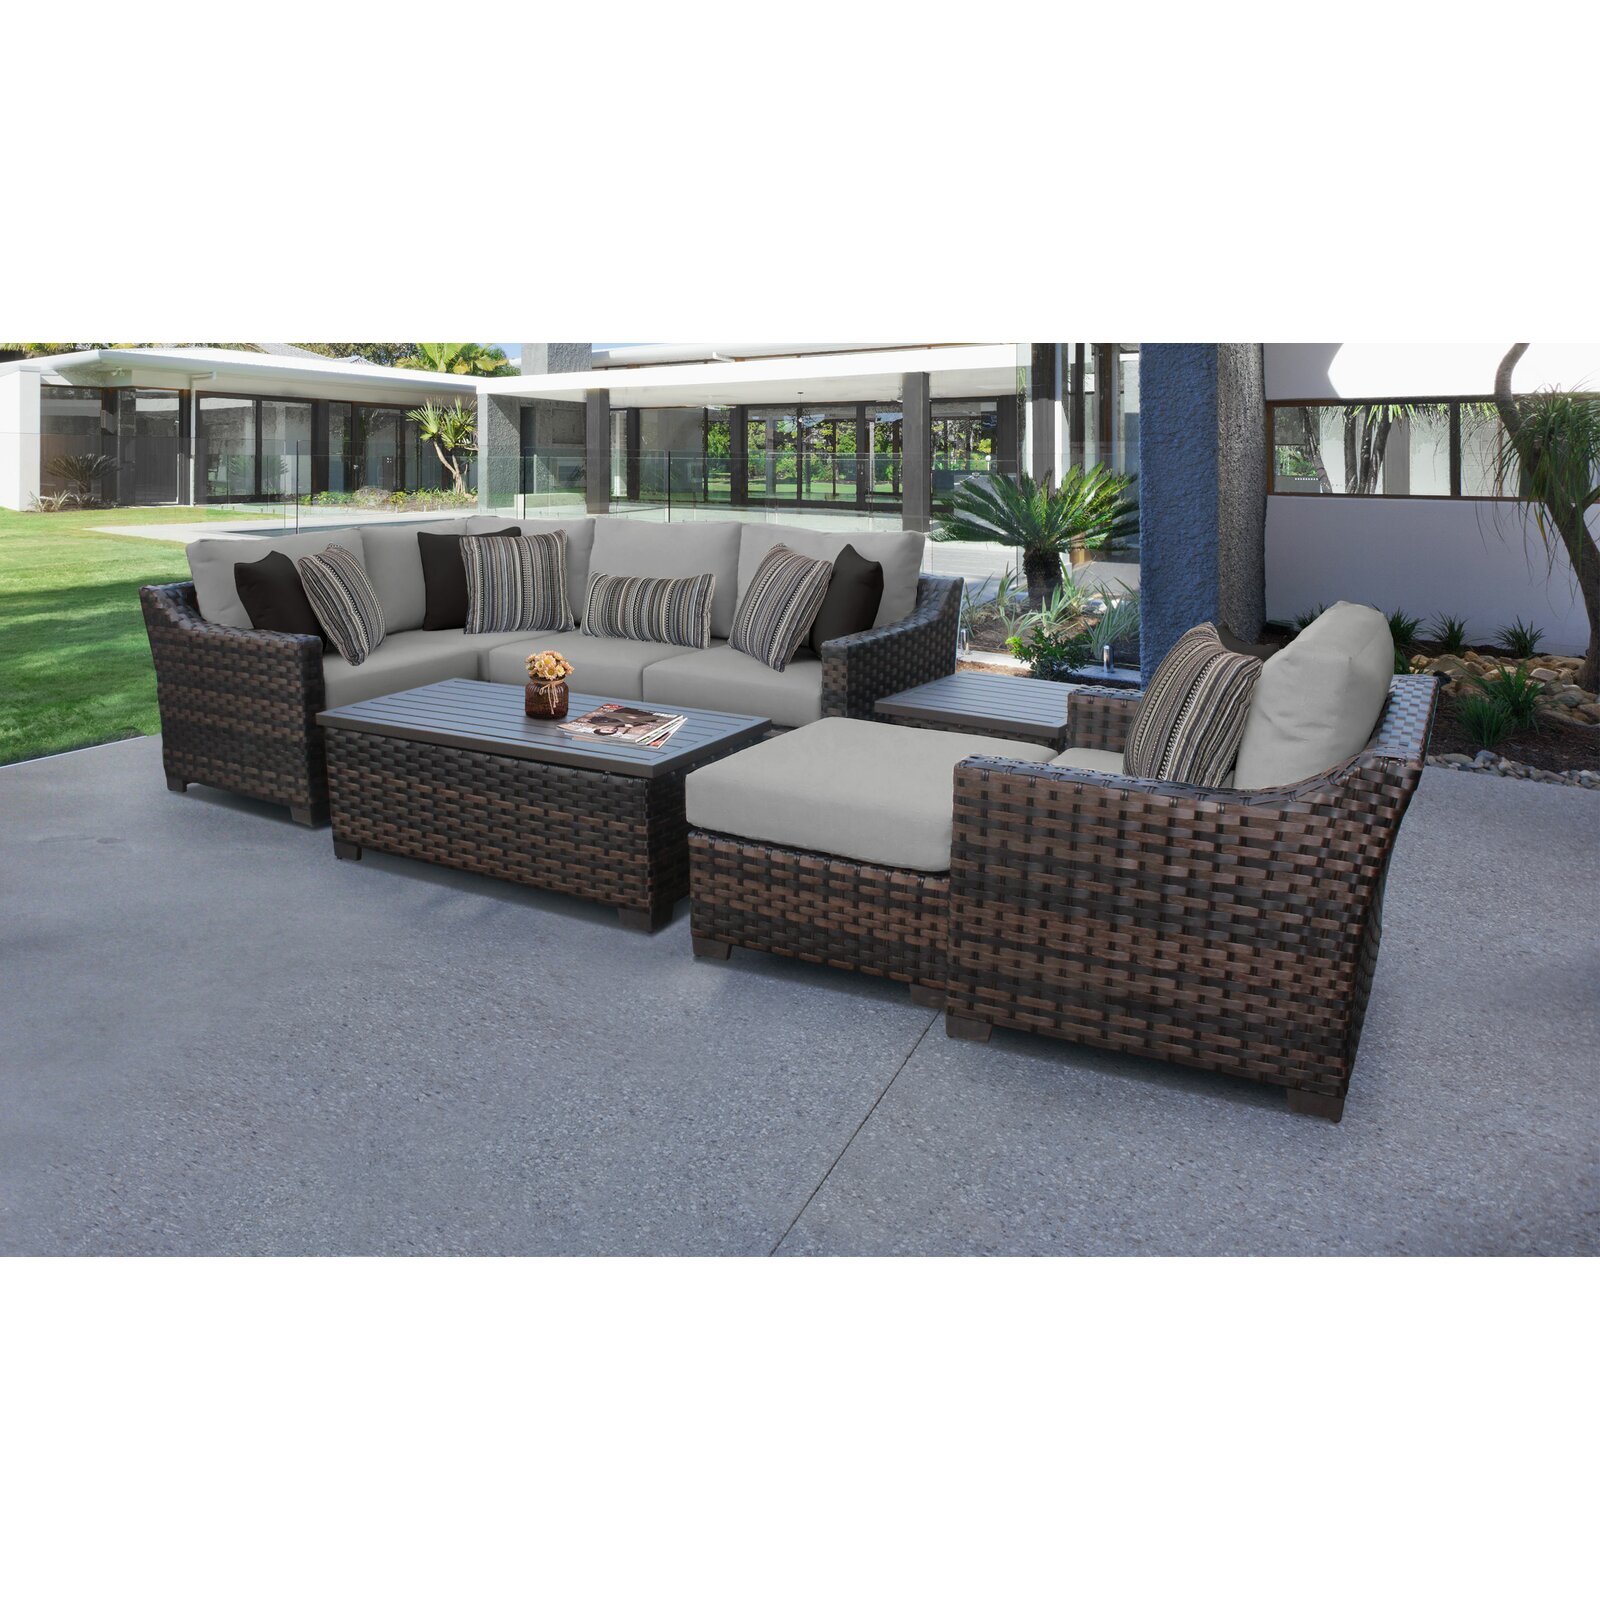 kathy ireland Homes & Gardens by TK Classics Wicker/Rattan 6 - Person Seating Group with Cushions & Reviews